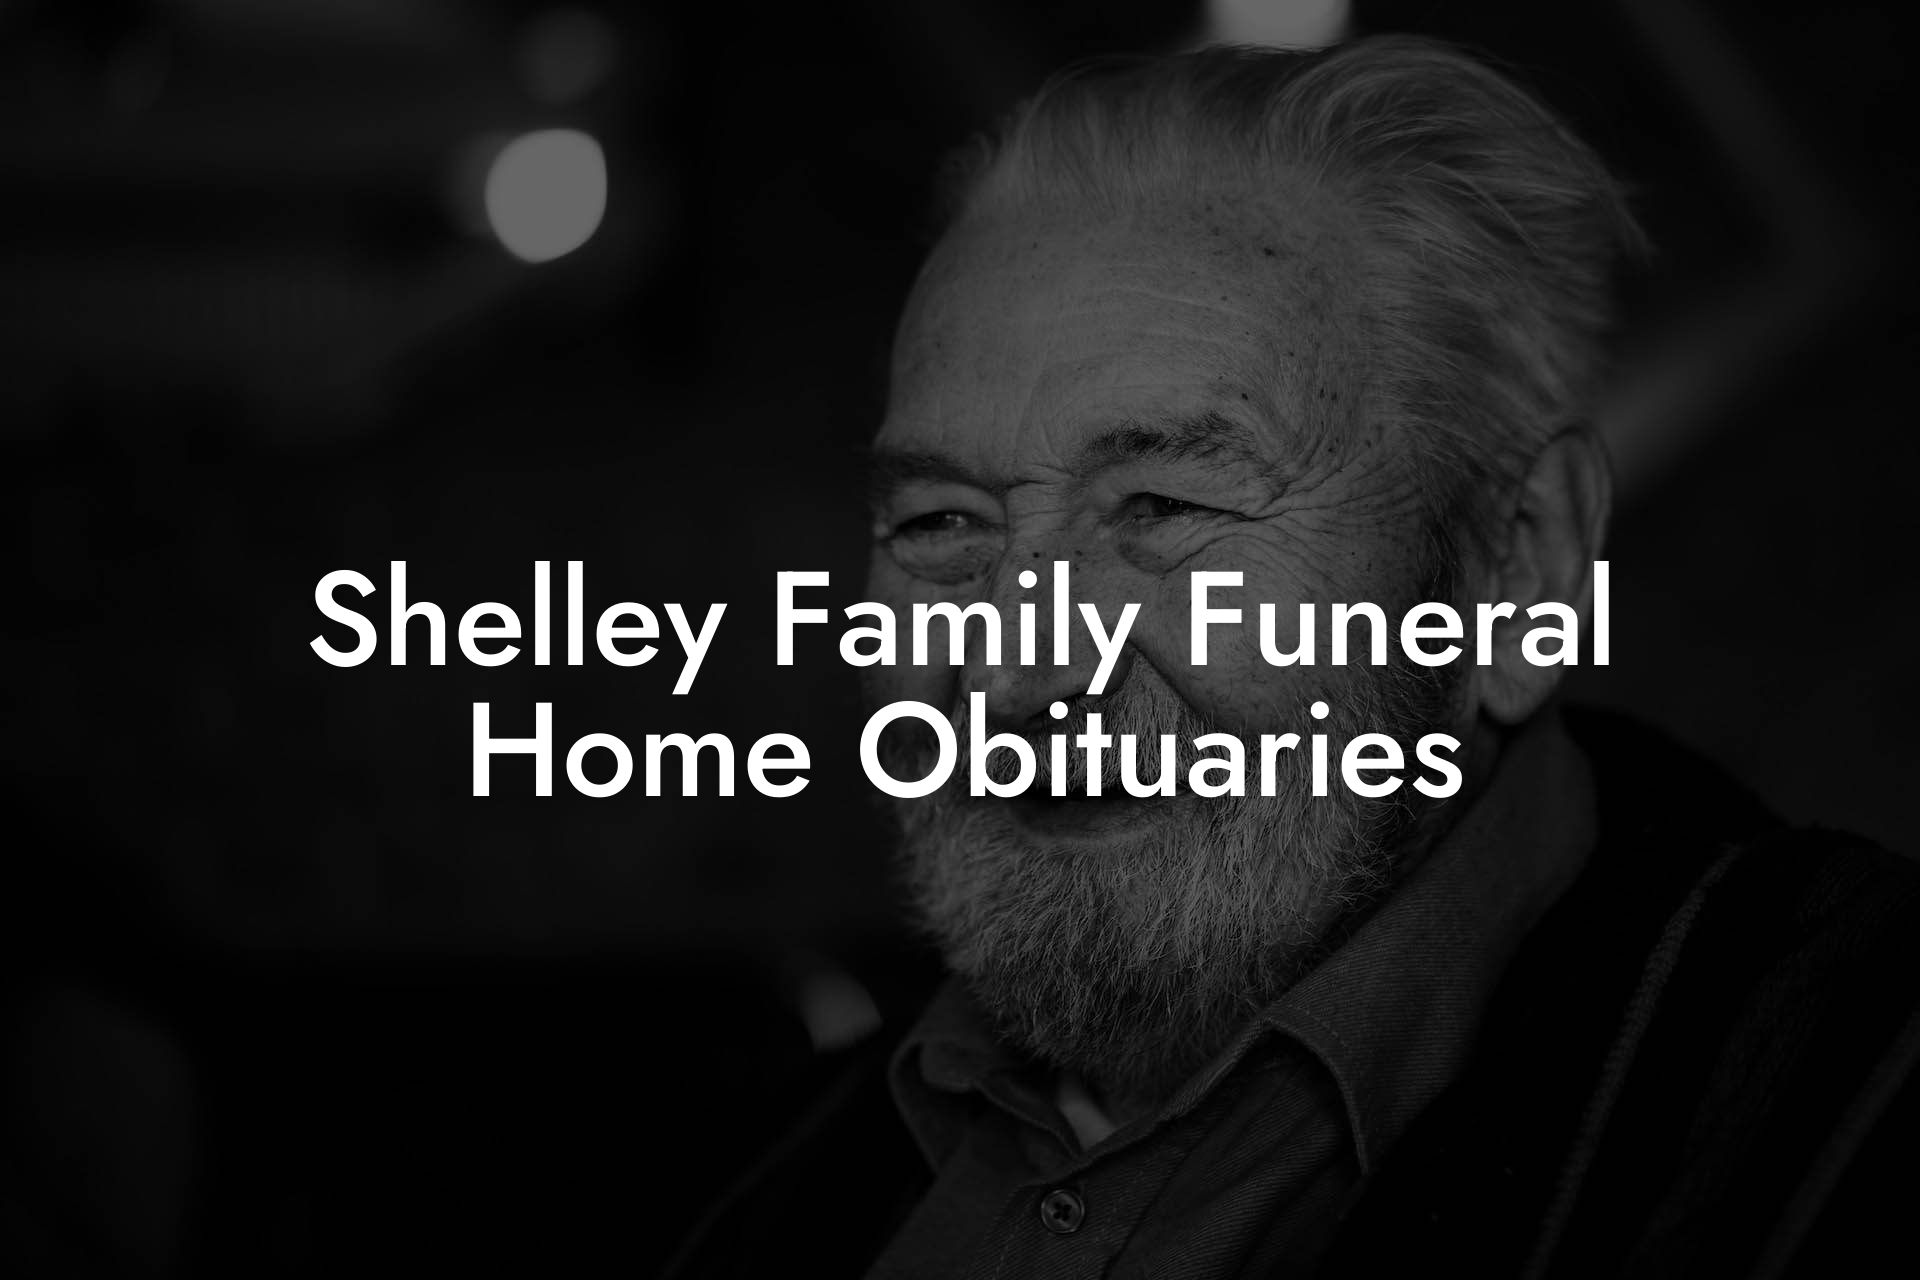 Shelley Family Funeral Home Obituaries